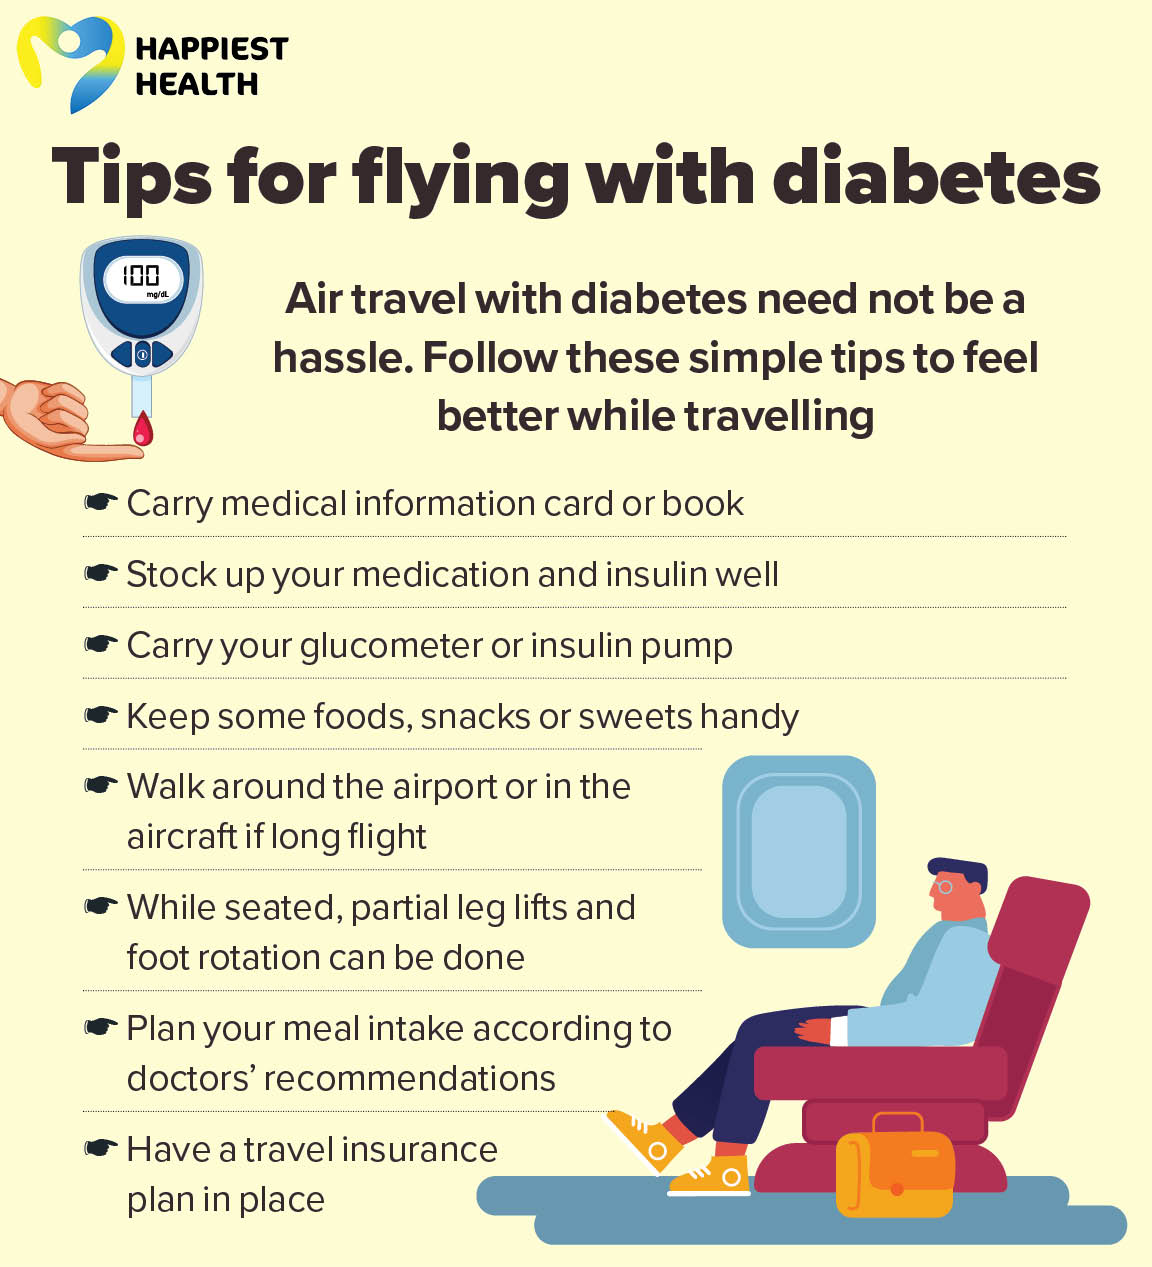 Air travel with diabetes need not be a hassle. Follow these simple tips to feel better while travelling Carry medical information card or book. Stock up your medication and insulin well Carry your glucometer or insulin pump. Keep some foods, snacks or sweets handy. Walk around the airport or in the aircraft if long flight. While seated, partial leg lifts and foot rotation can be done. Plan your meal intake according to doctors’ recommendations. Have a travel insurance plan in place. 